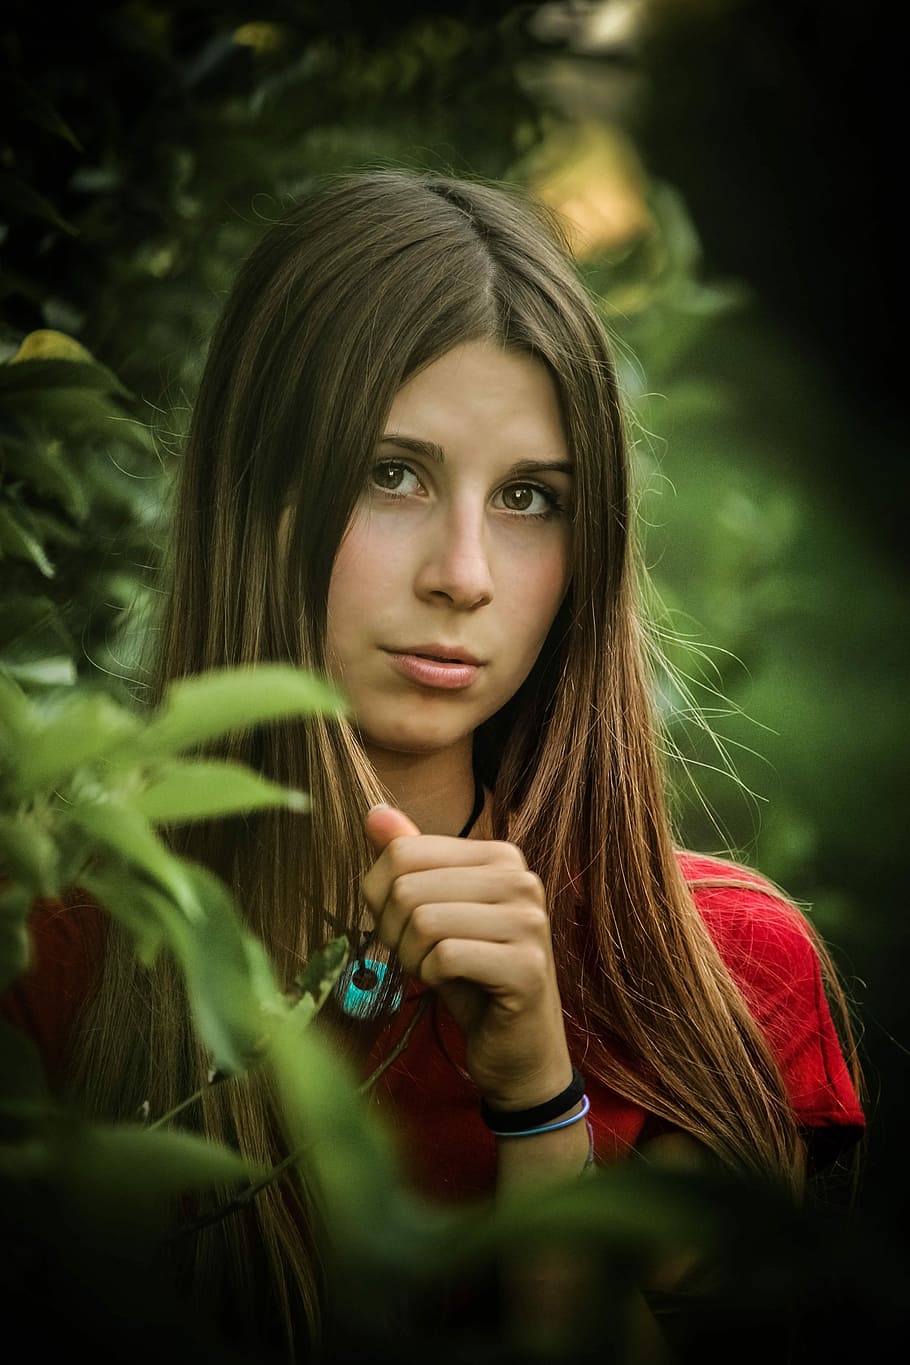 woman, wearing, red, top, plants, daytime, green, portrait, eyes, nature